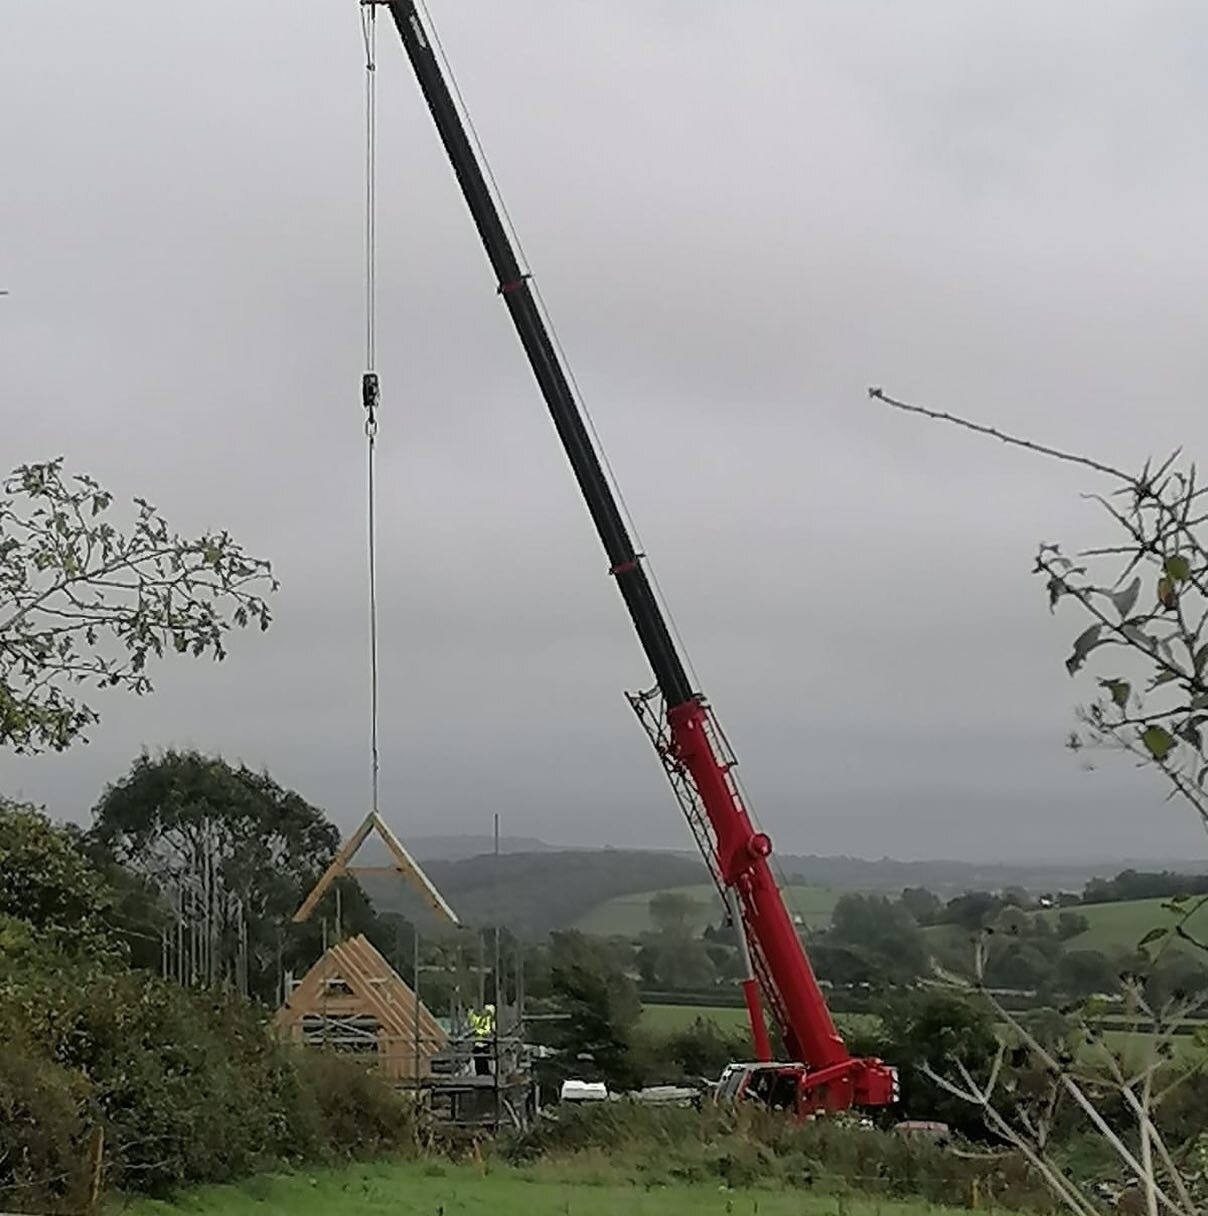 All go on site this week as the team installs a 2 storey oak frame into a Devon cob barn. The frame has been built to match the existing footprint with walls tapering from one end to the other by nearly a metre. 

#oakframe 
#oakframedbuilding 
#besp